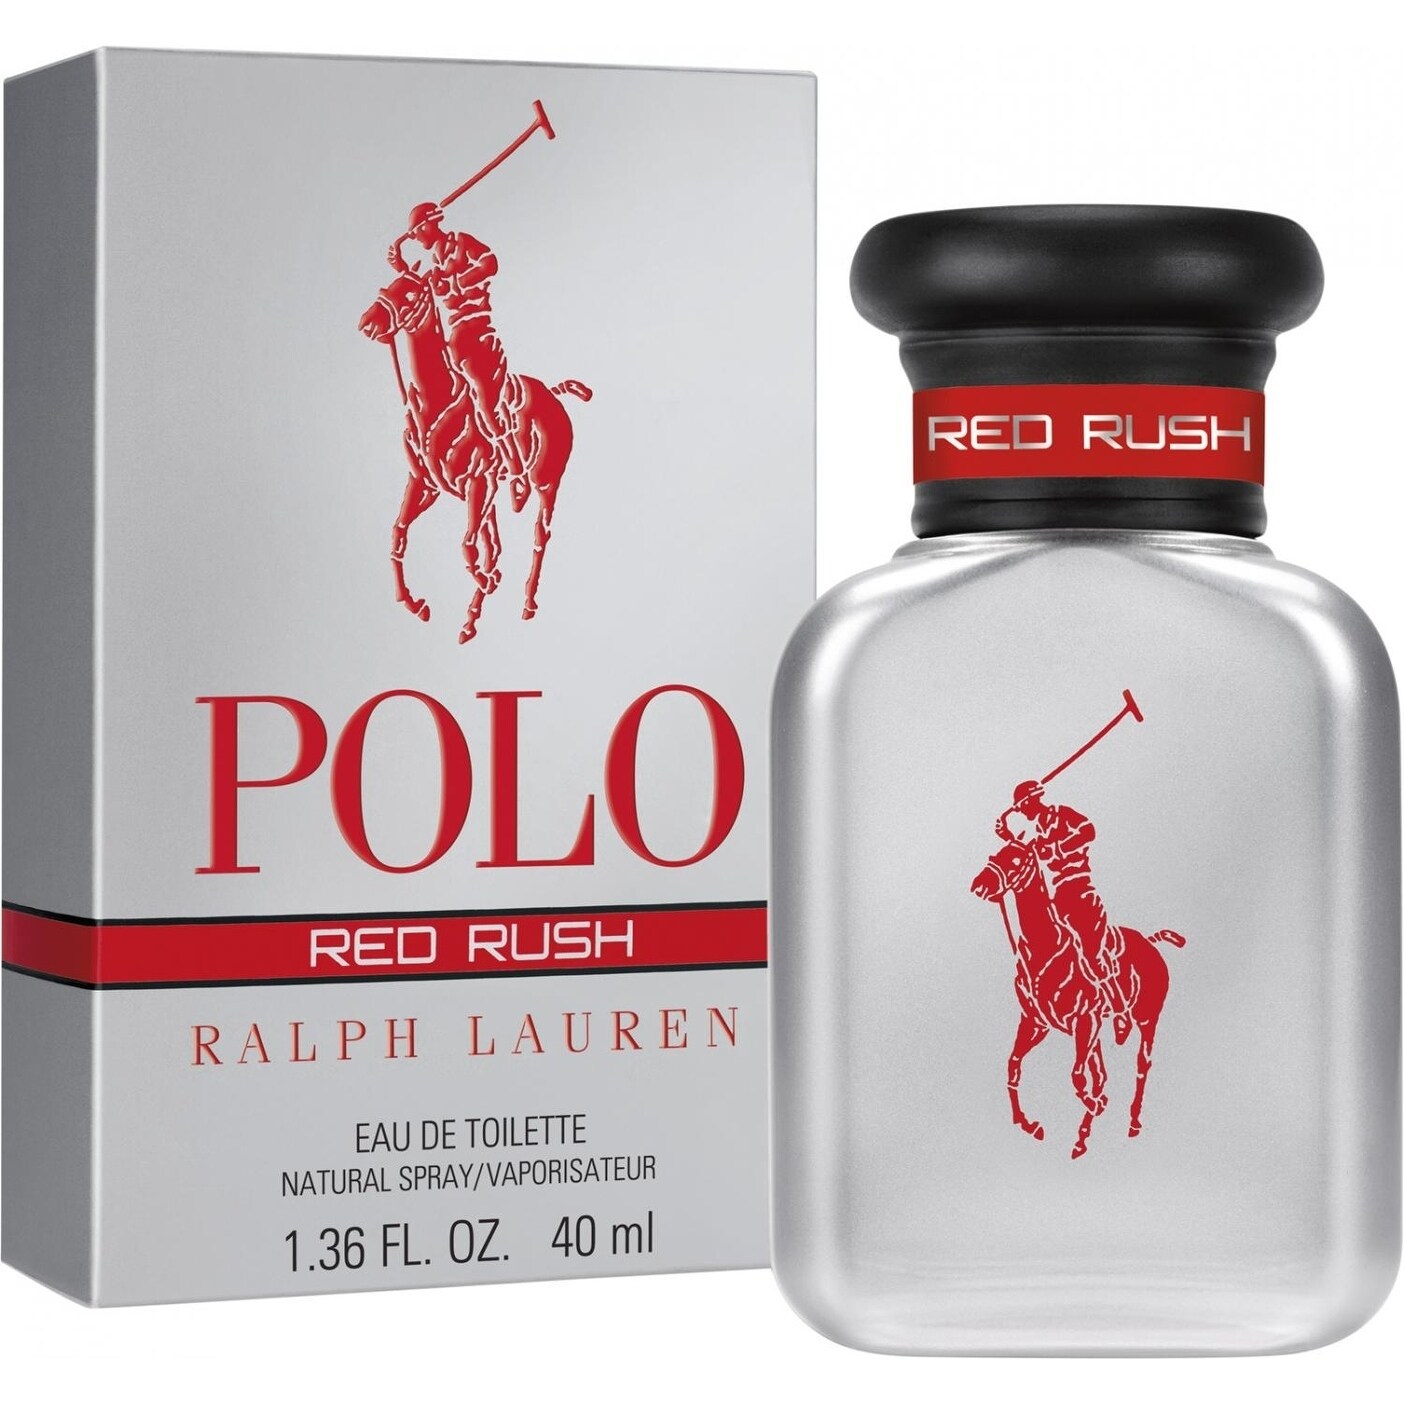 new polo red rush